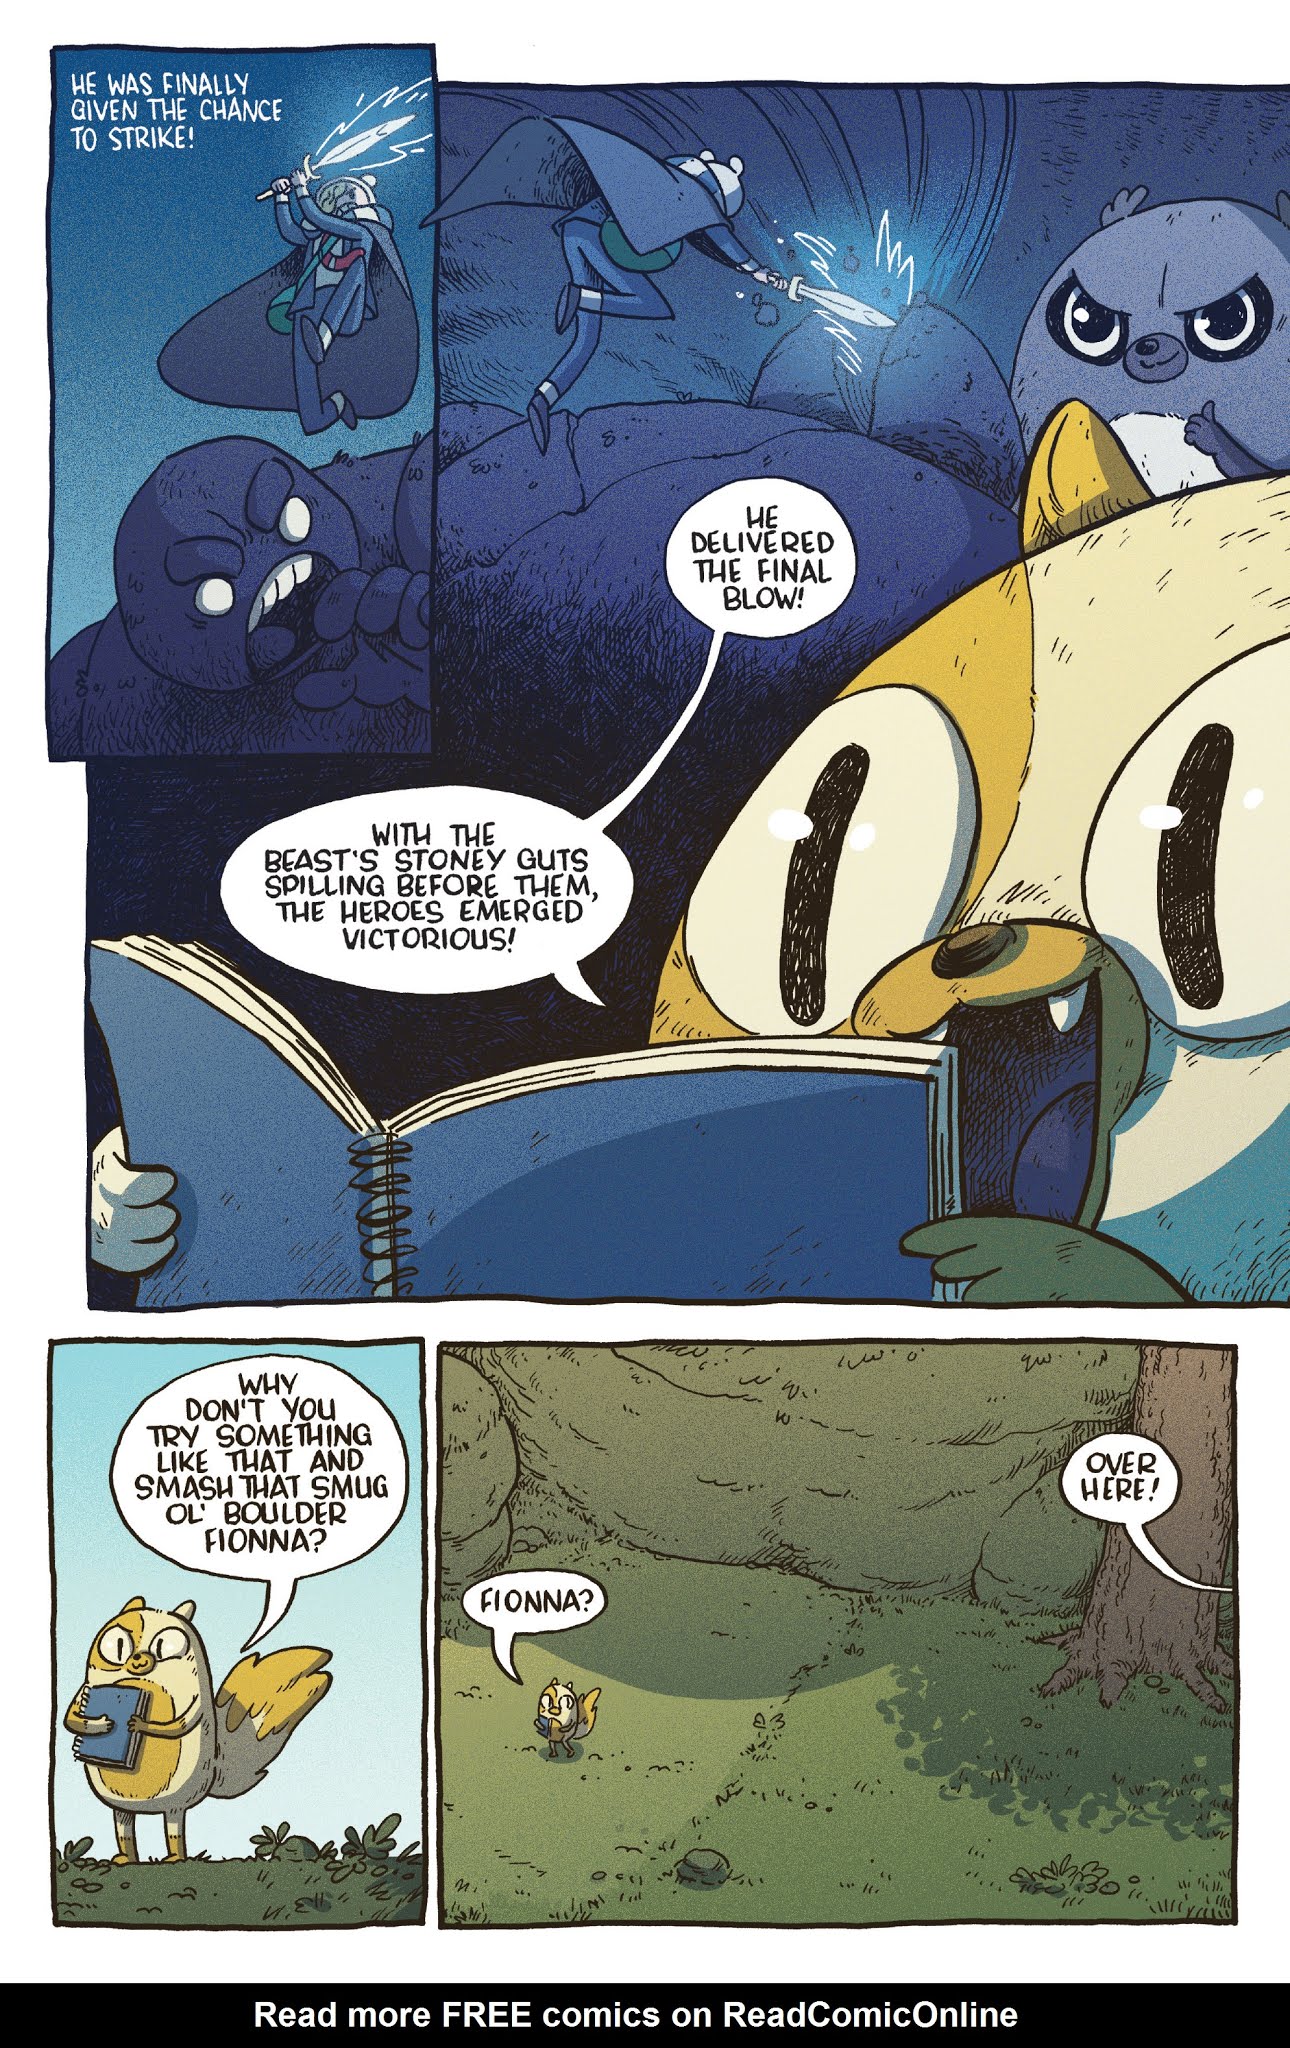 Read online Free Comic Book Day 2018 comic -  Issue # Adventure Time with Fionna and Cake - 9